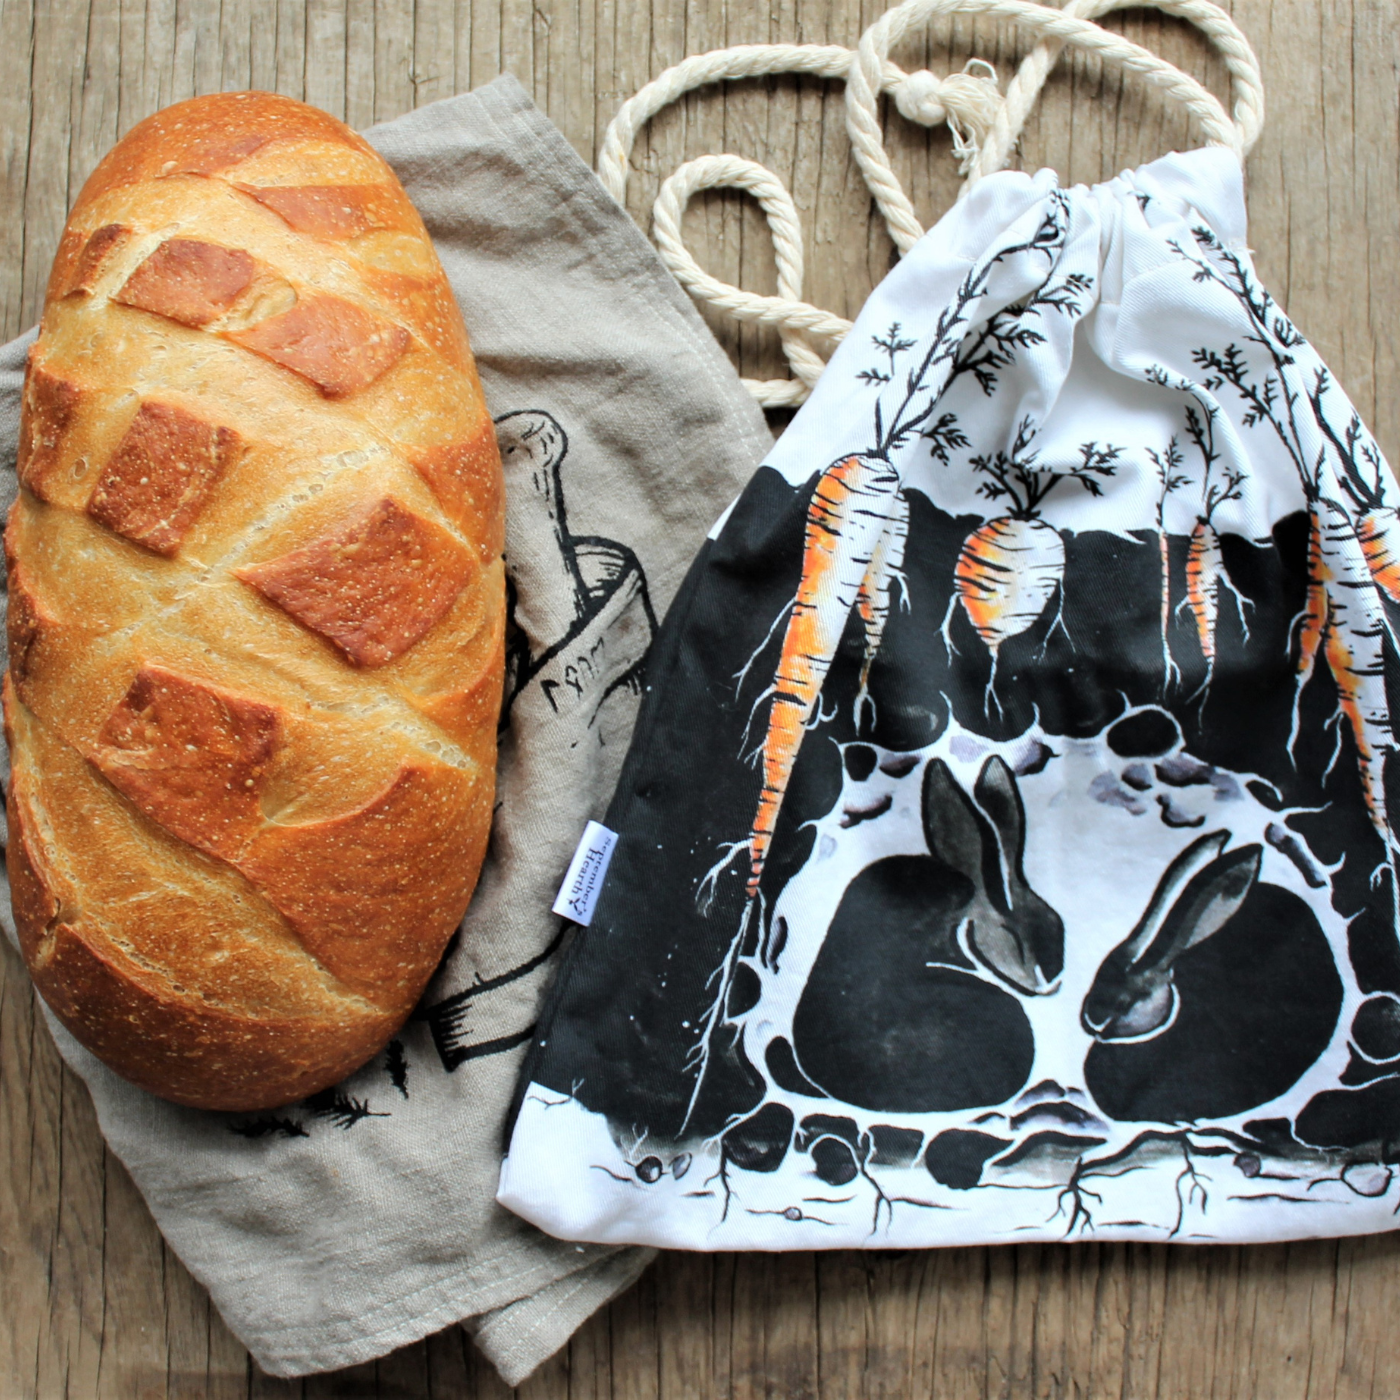 A white bread bag lays on a wooden table. The bag has a white rope closure and a design that peeks into a rabbit den showing two black rabbits curled up and sleeping with orange carrots growing in the earth above and on either side of them. A large loaf of bread is to the right of the bag. The bread sits on light brown fabric with parts of a black-lined design, that appears to be the edge of a hand-drawn mortar and pestle, showing on the right-hand side of the loaf.